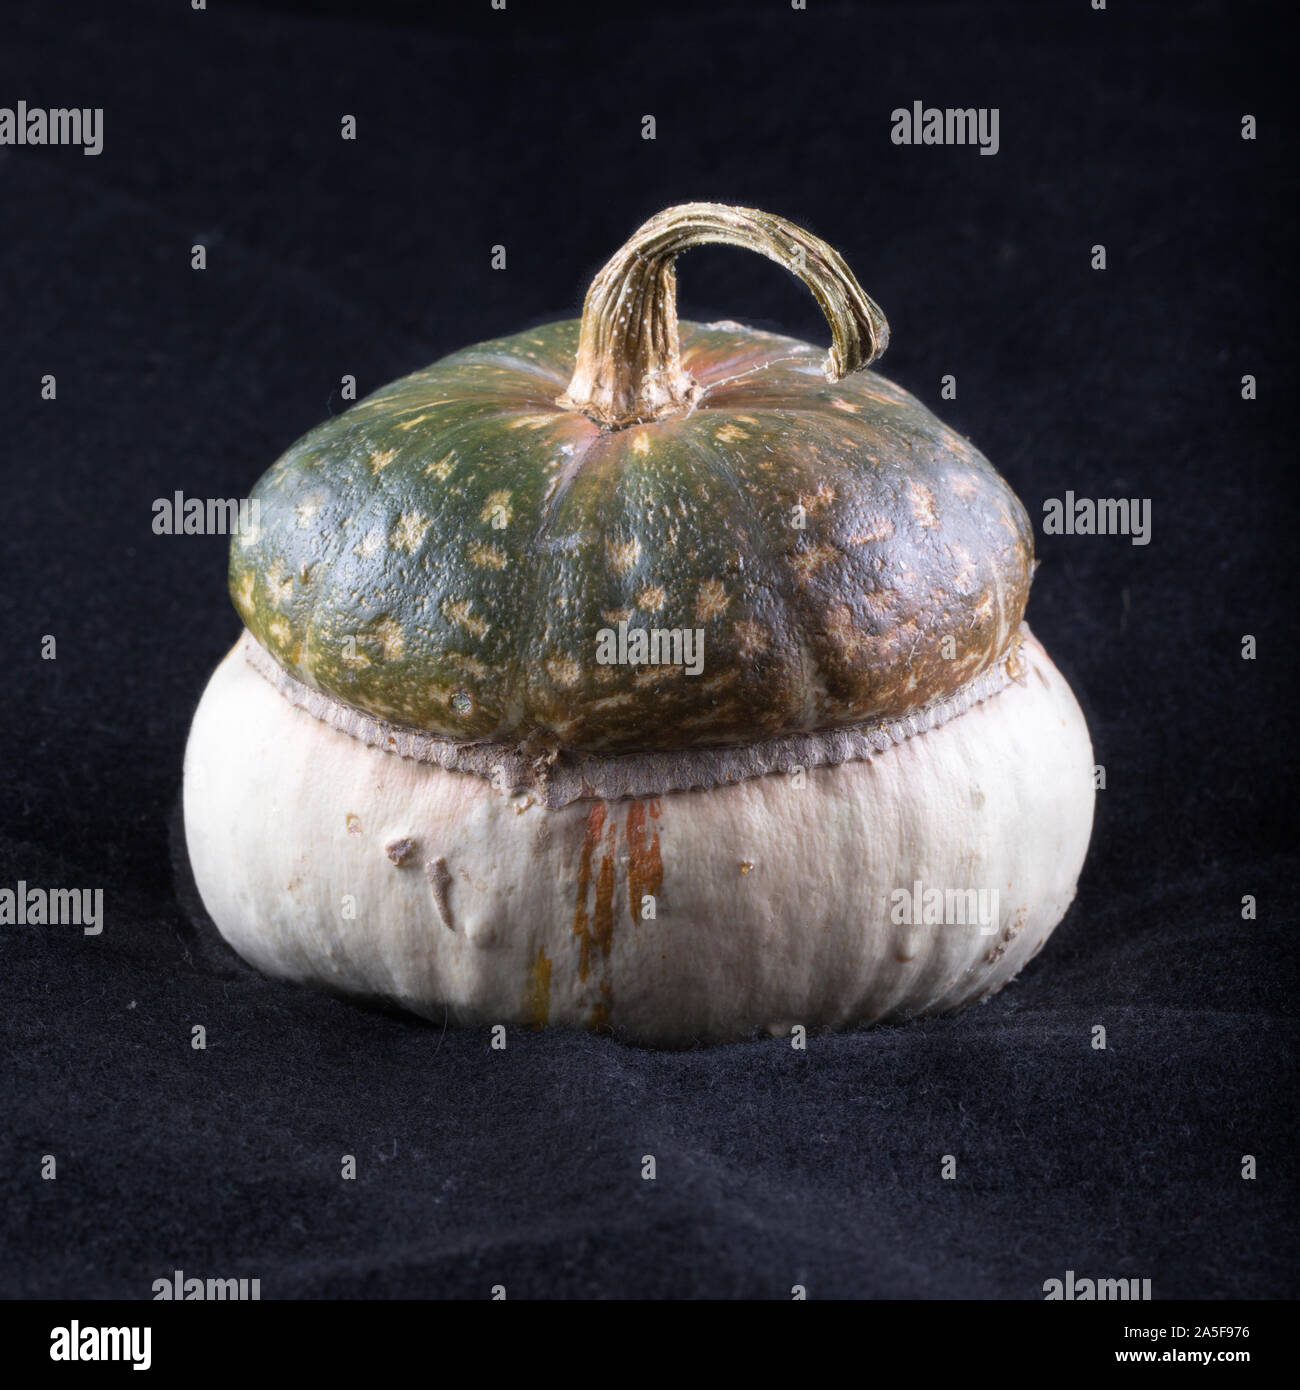 Pumpkin over a black background, square image Stock Photo